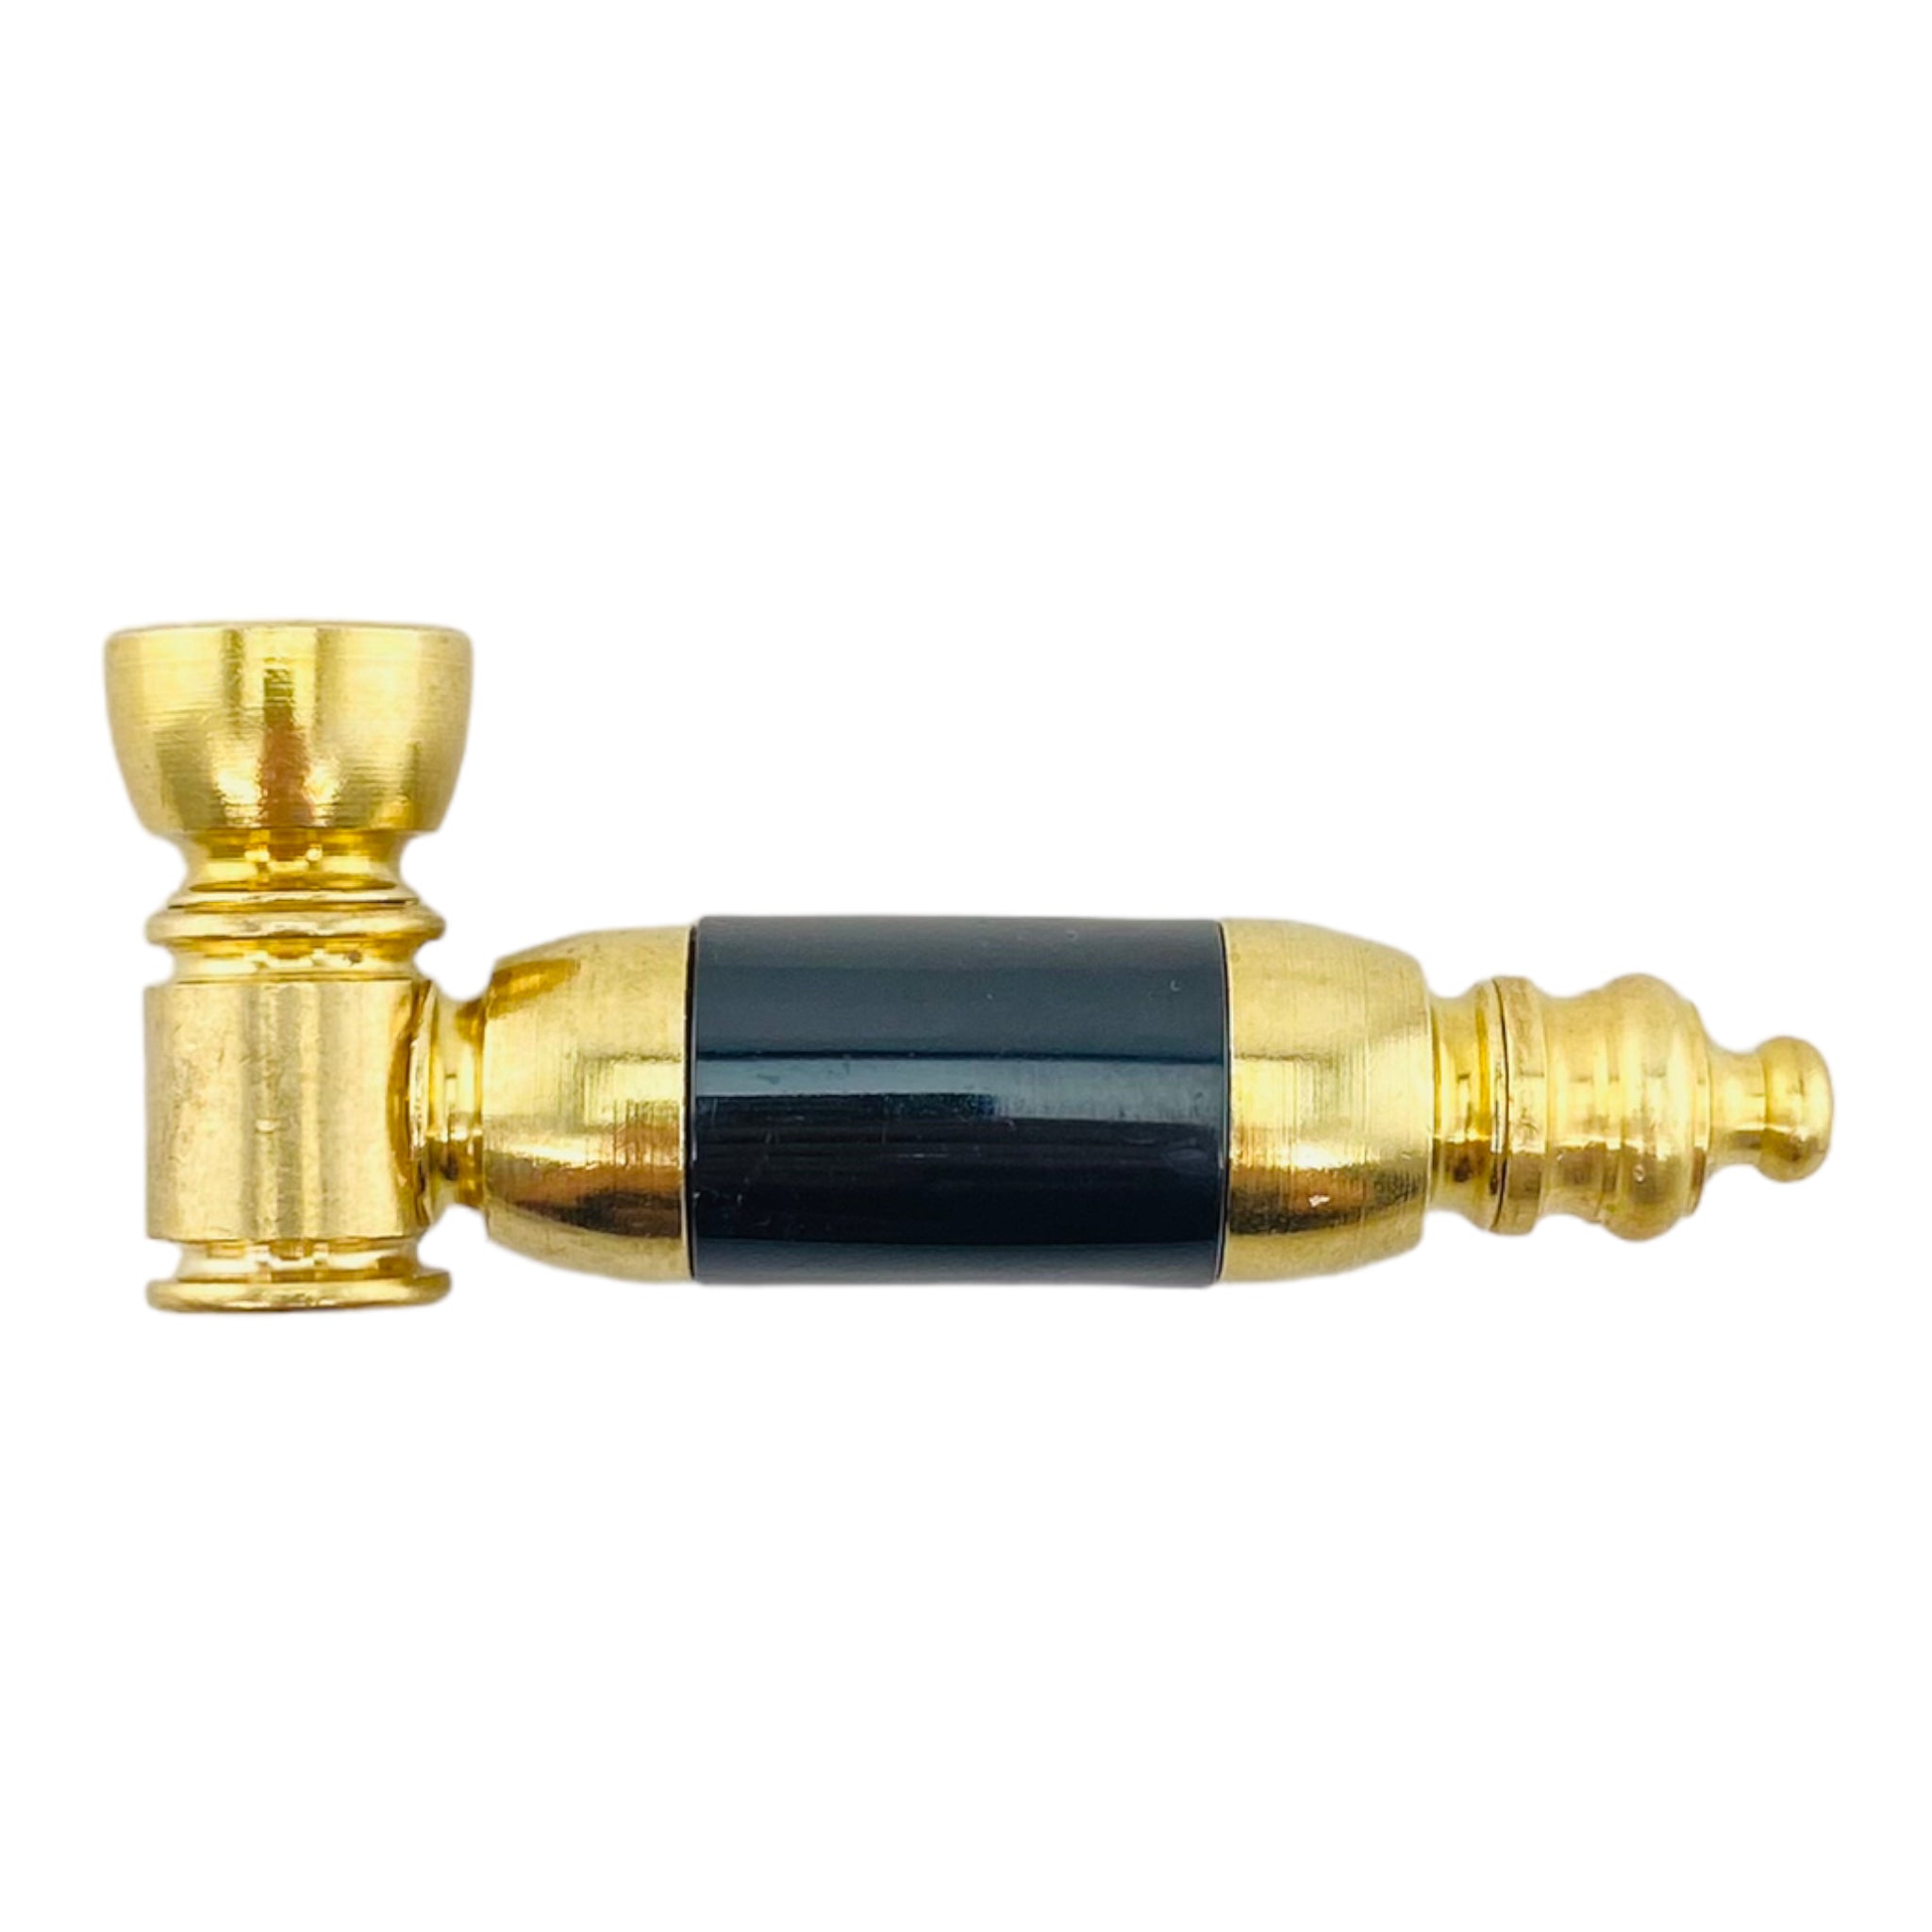 Metal Weed Pipes - Brass Hand Pipe With Large Plastic Chamber